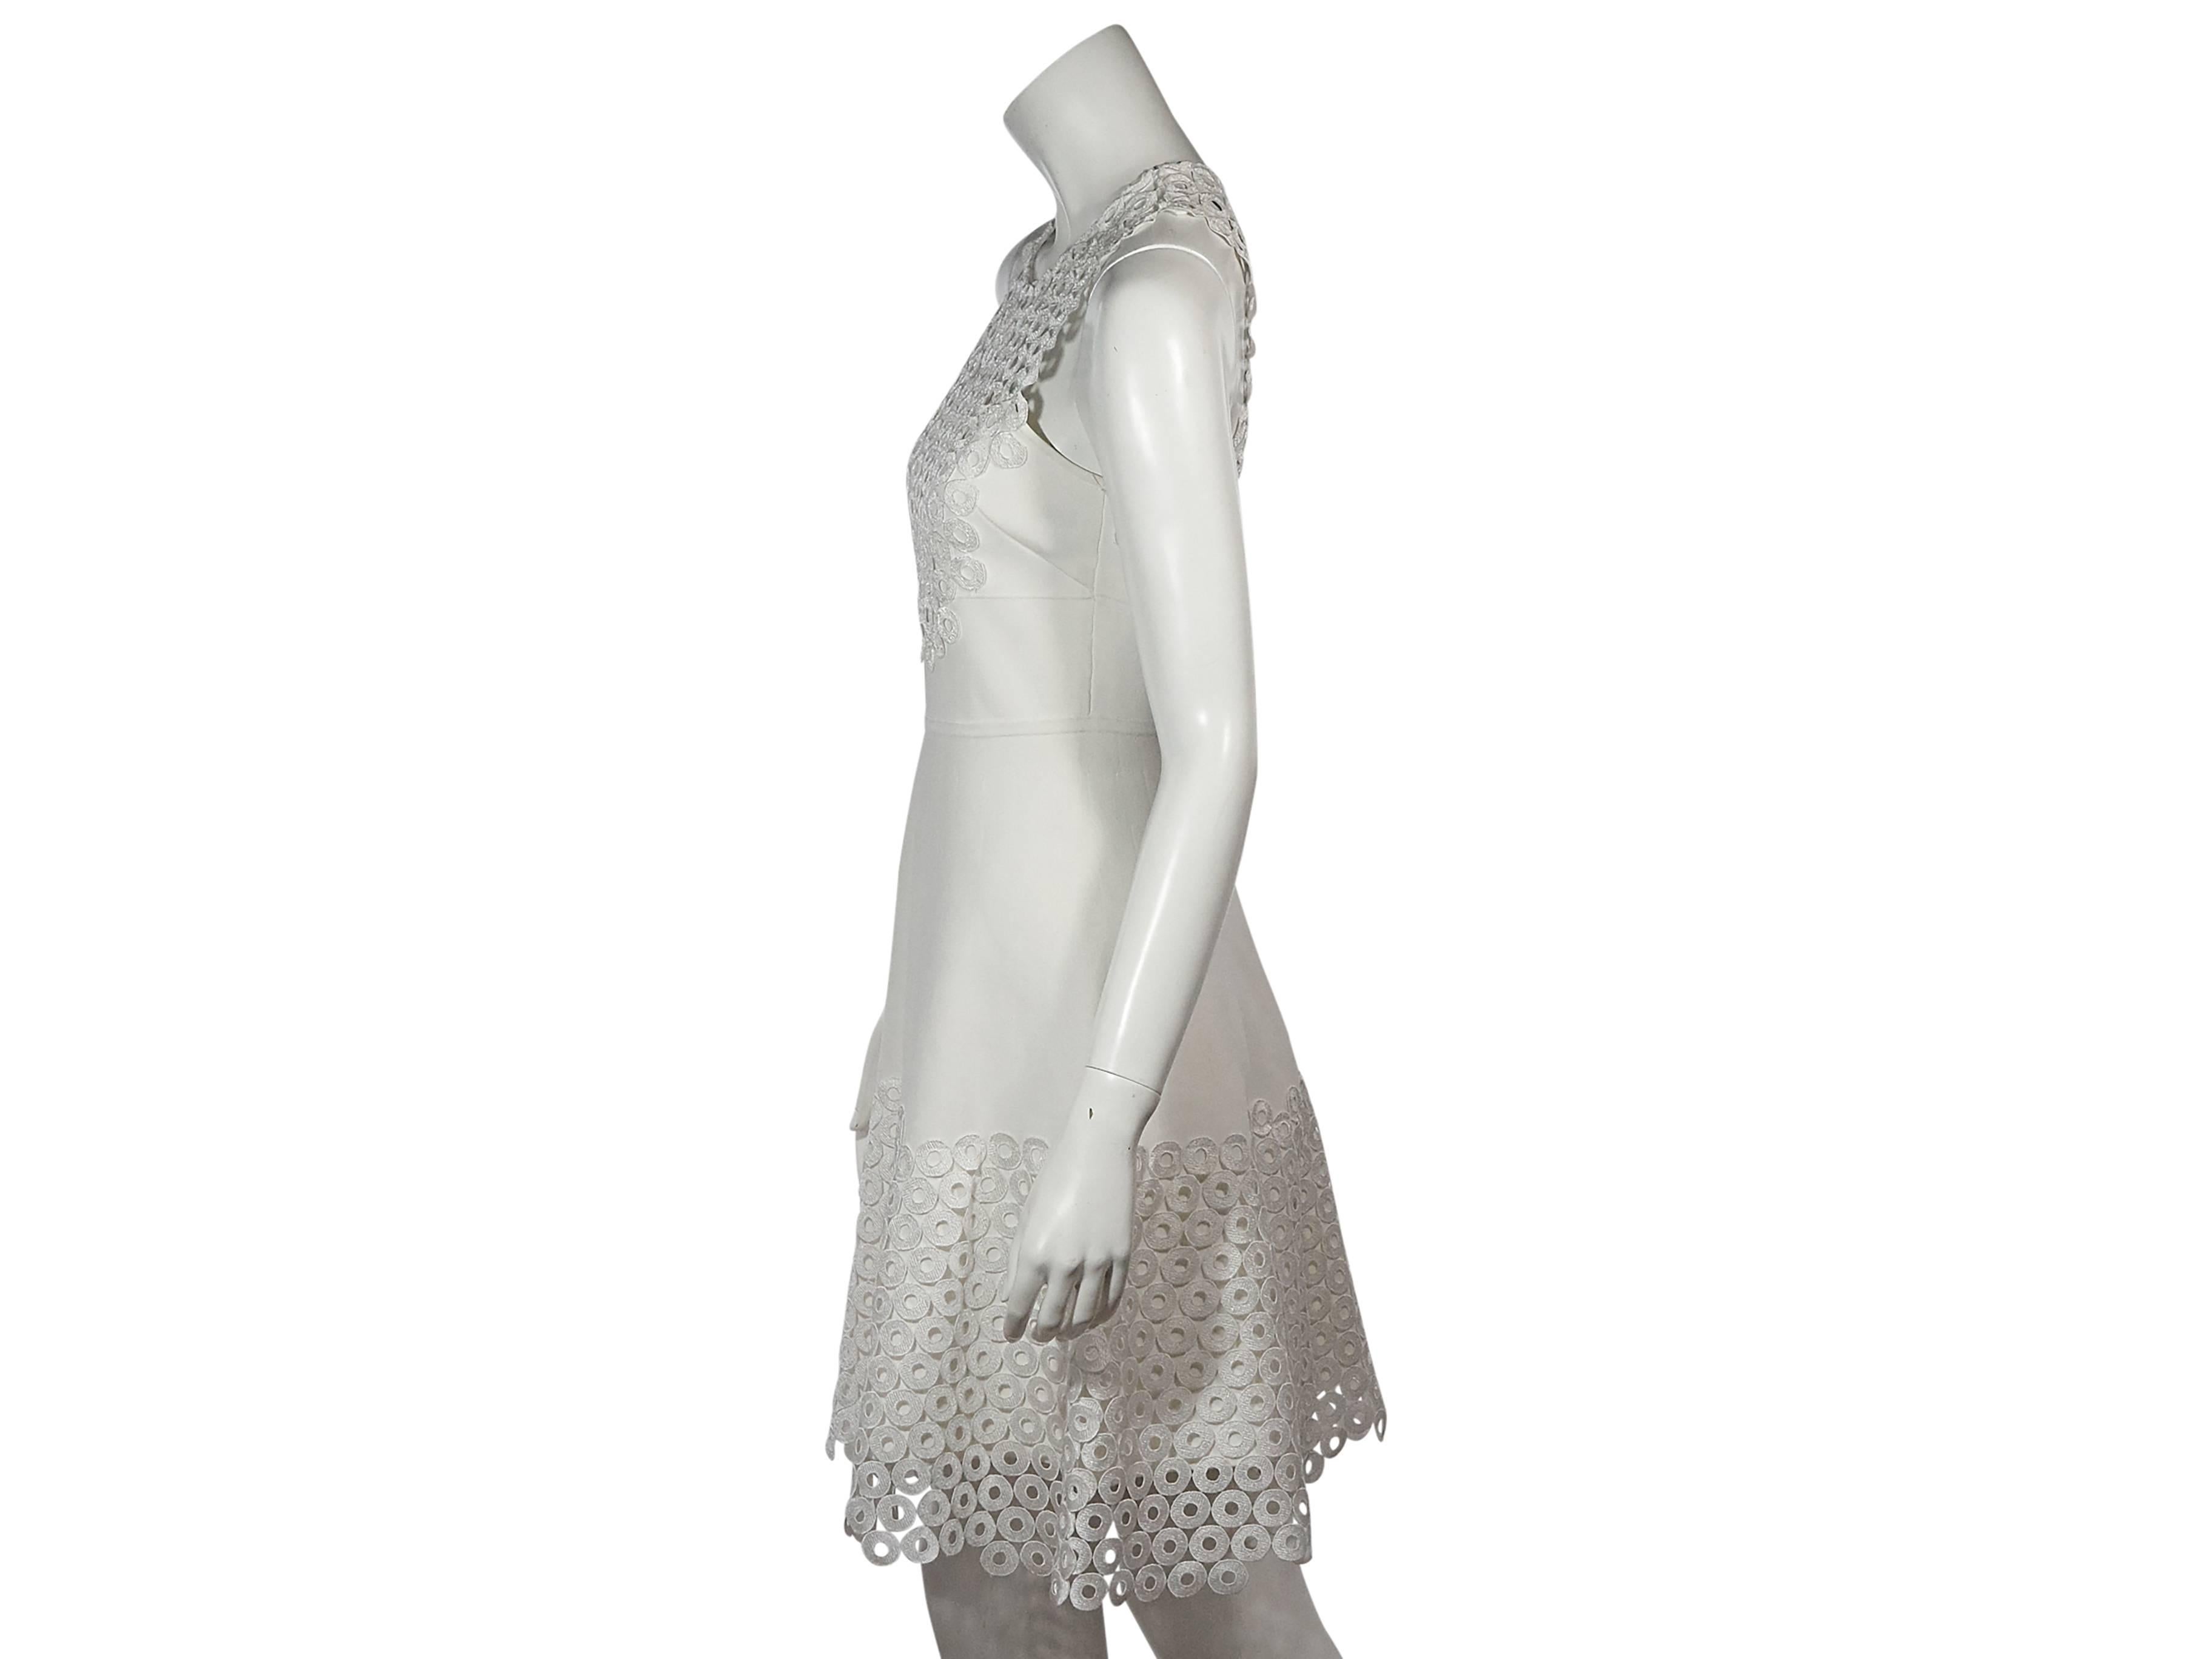 Product details: White fit-and-flare eyelet dress by Lela Rose. Jewelneck. Sleeveless. Concealed back zip closure. 
Condition: Very good. 
Est. Retail $ 528.00